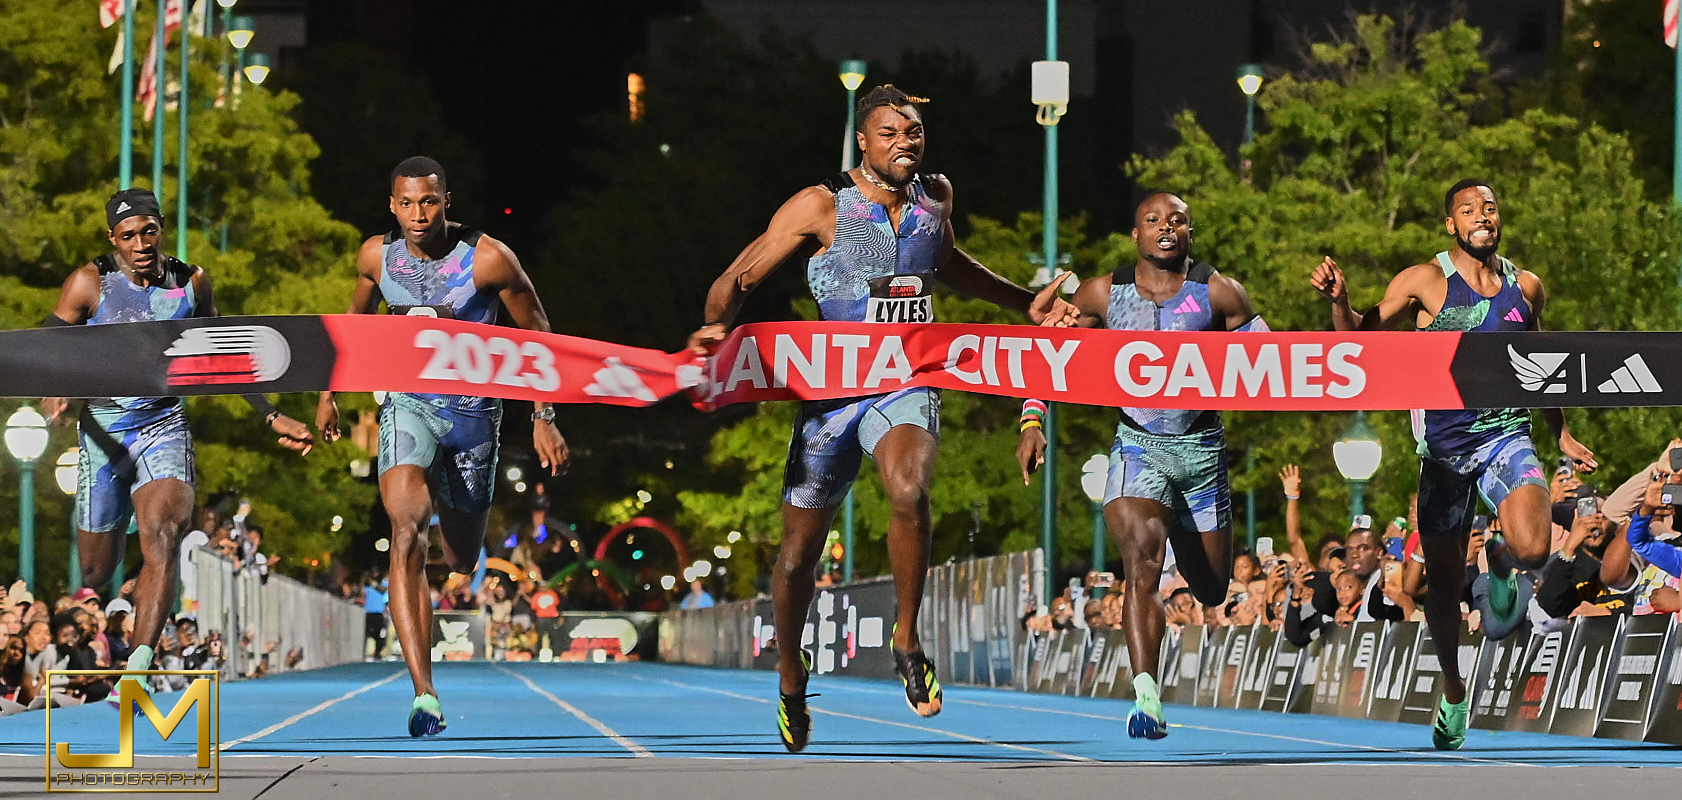 Noah Lyles caps a spectacular night of track and field with a win in the 150 m at the Adidas Atlanta City Games.